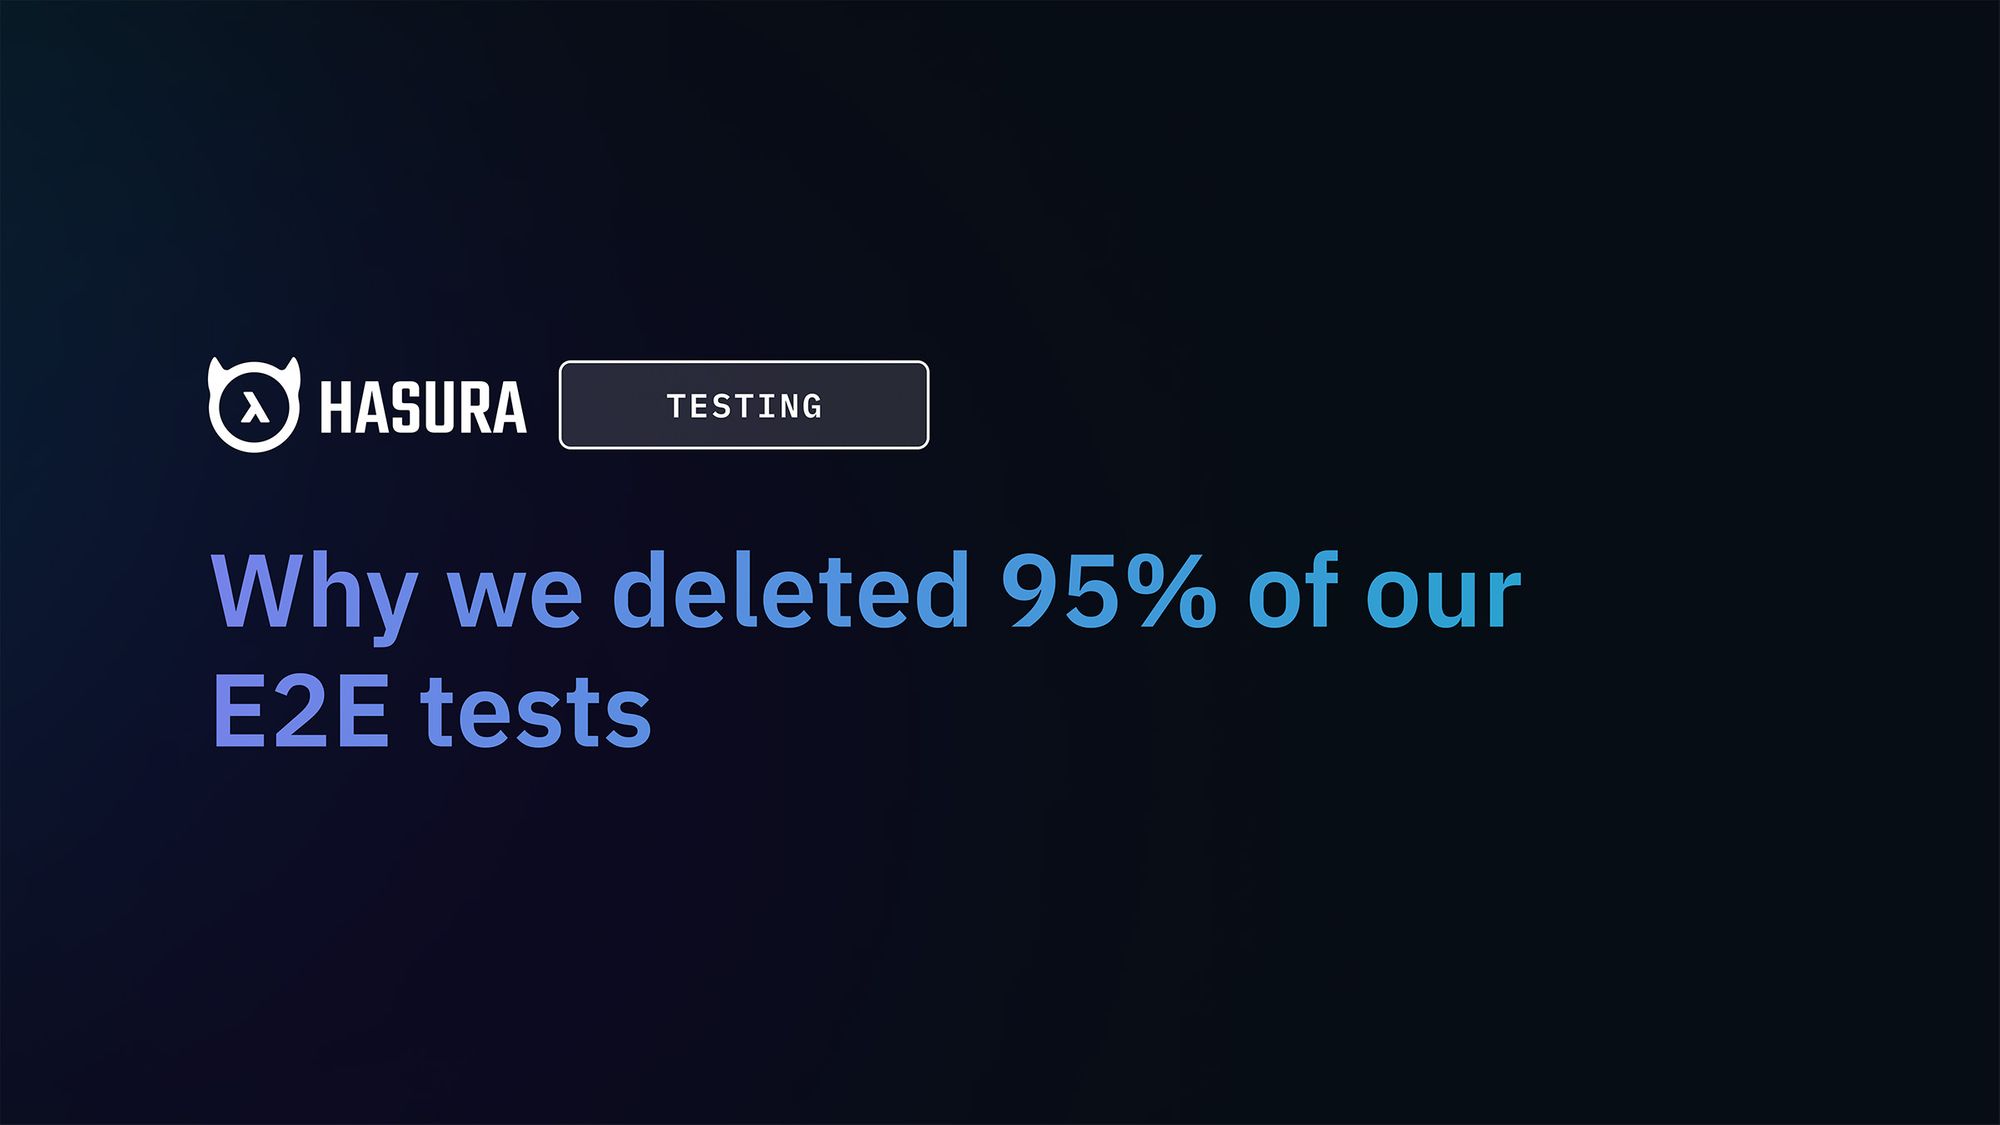 Why we deleted 95% of our E2E tests